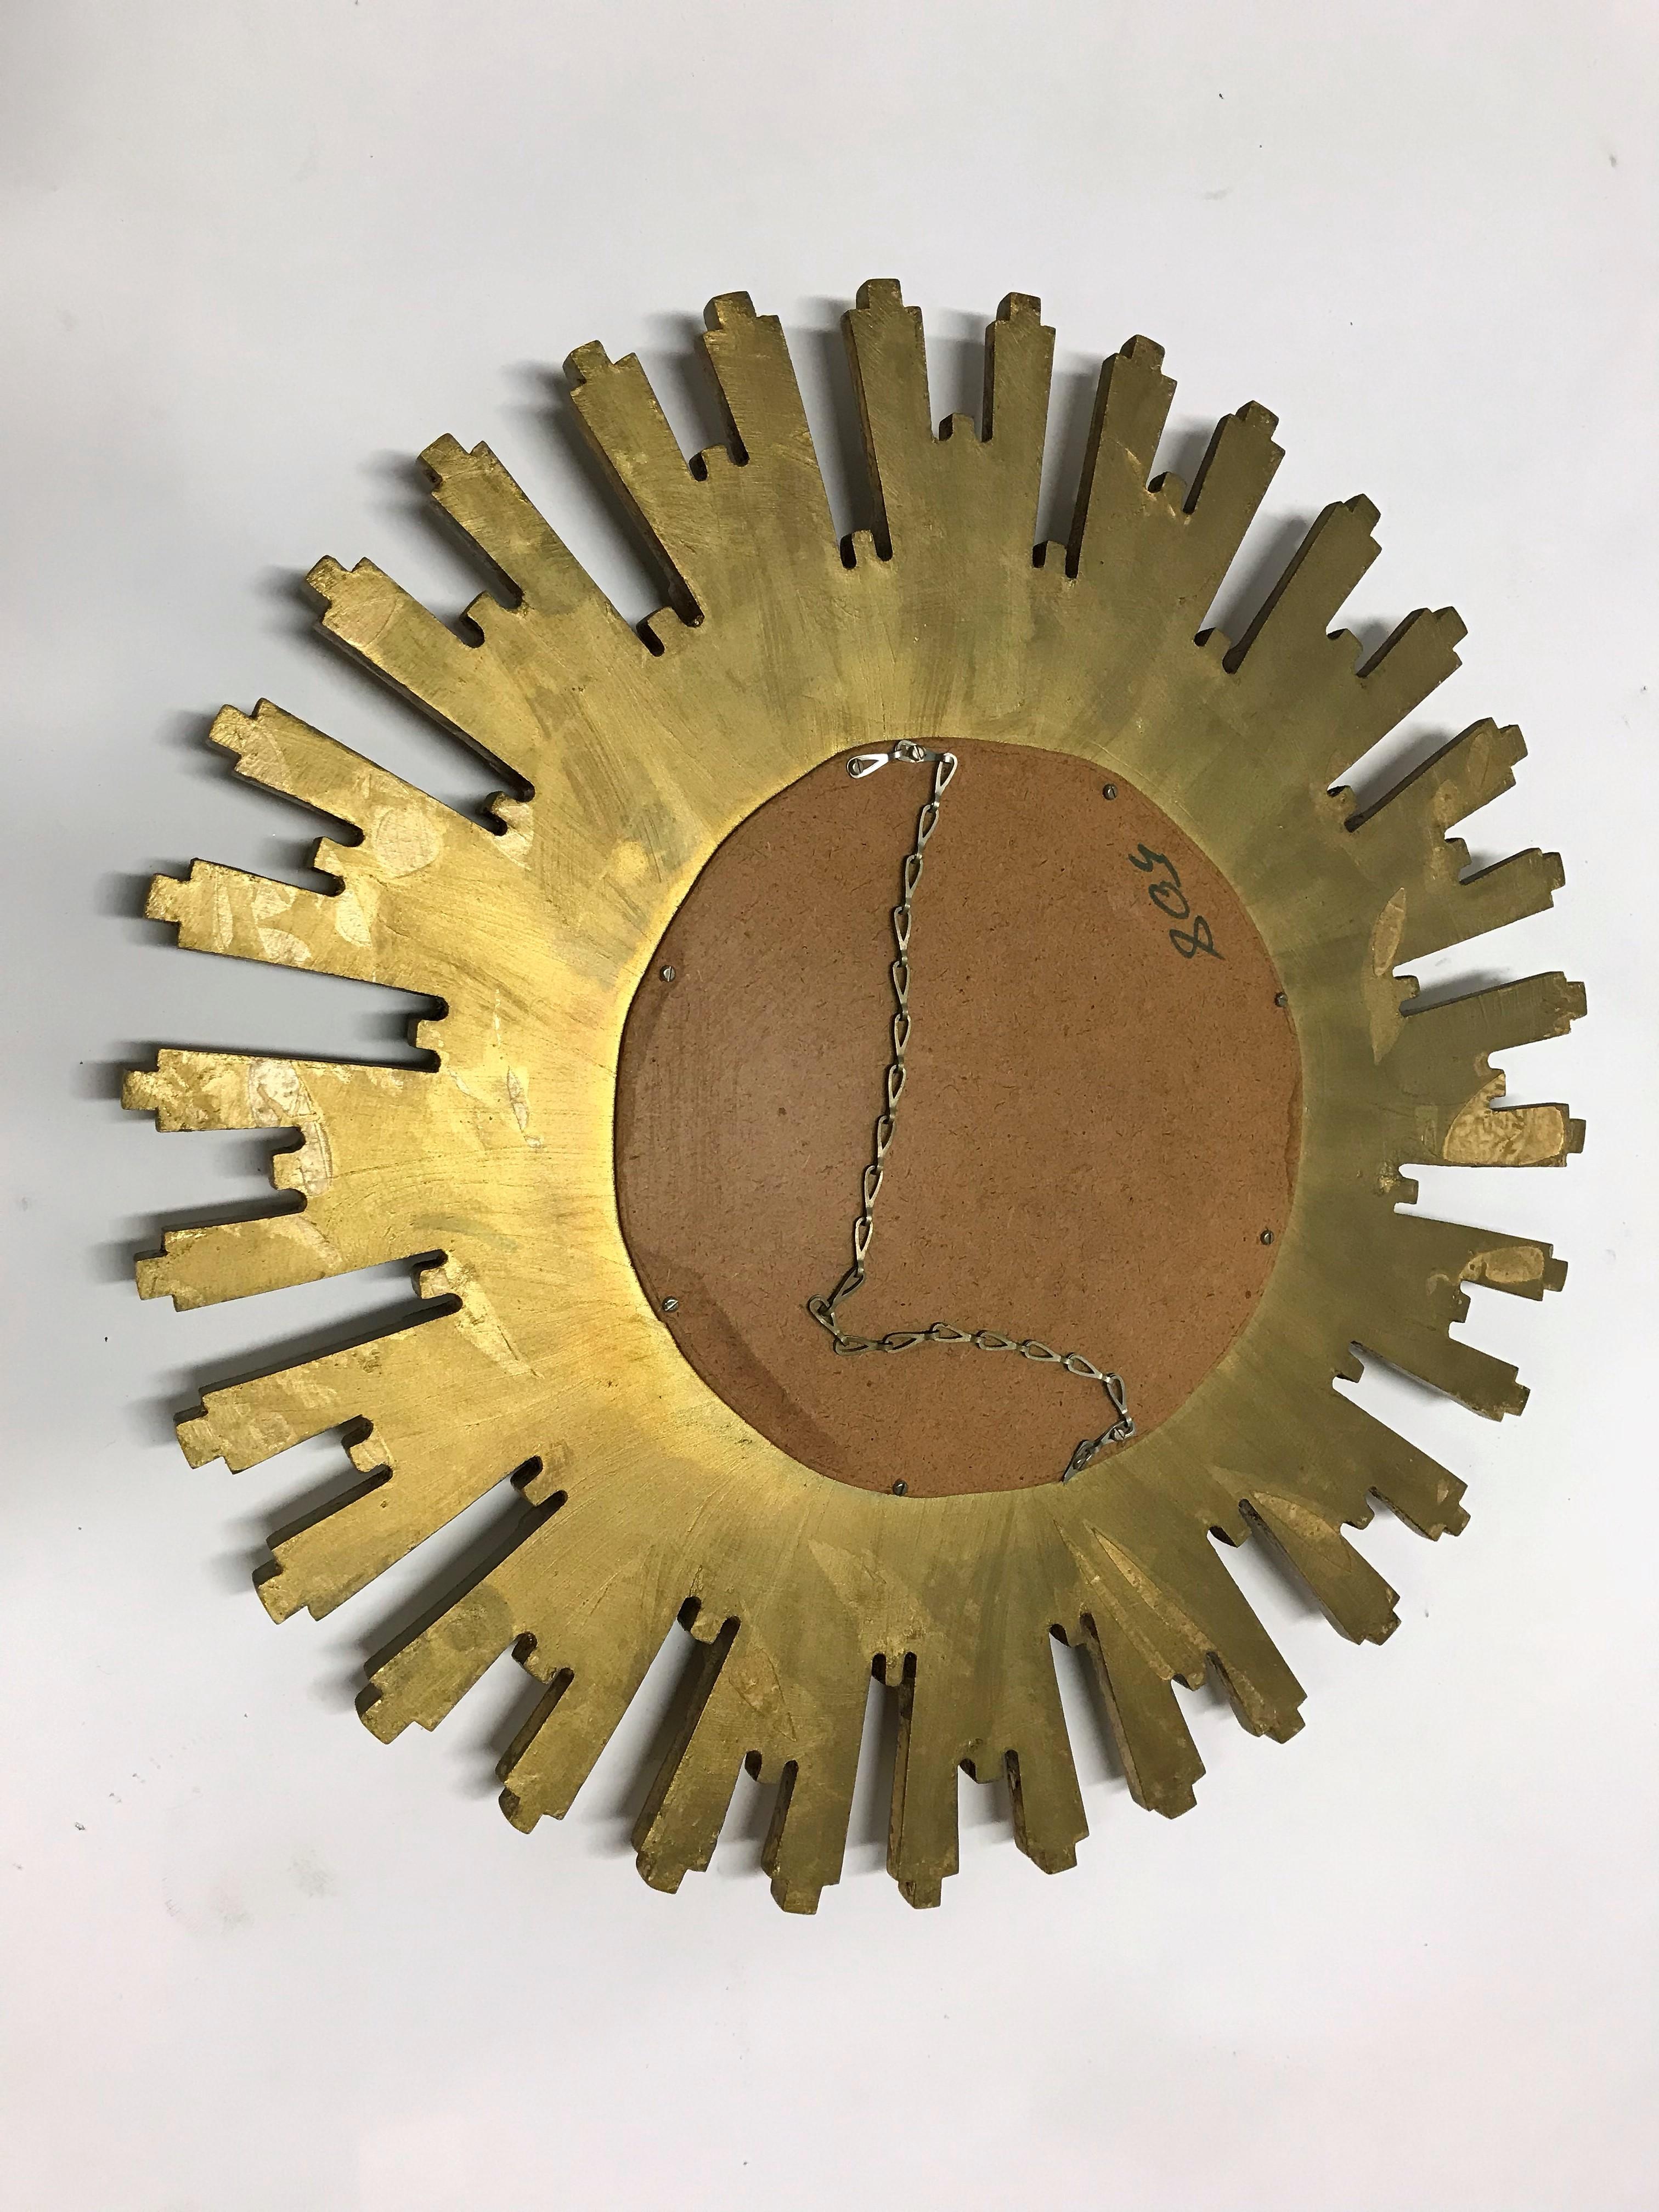 Heavy gilded resin sunburst mirror with convex mirror glass.

The golden mirror is in a very good condition.

1960s, made in Belgium.

Dimensions:
Diameter 55 cm/ 21.6